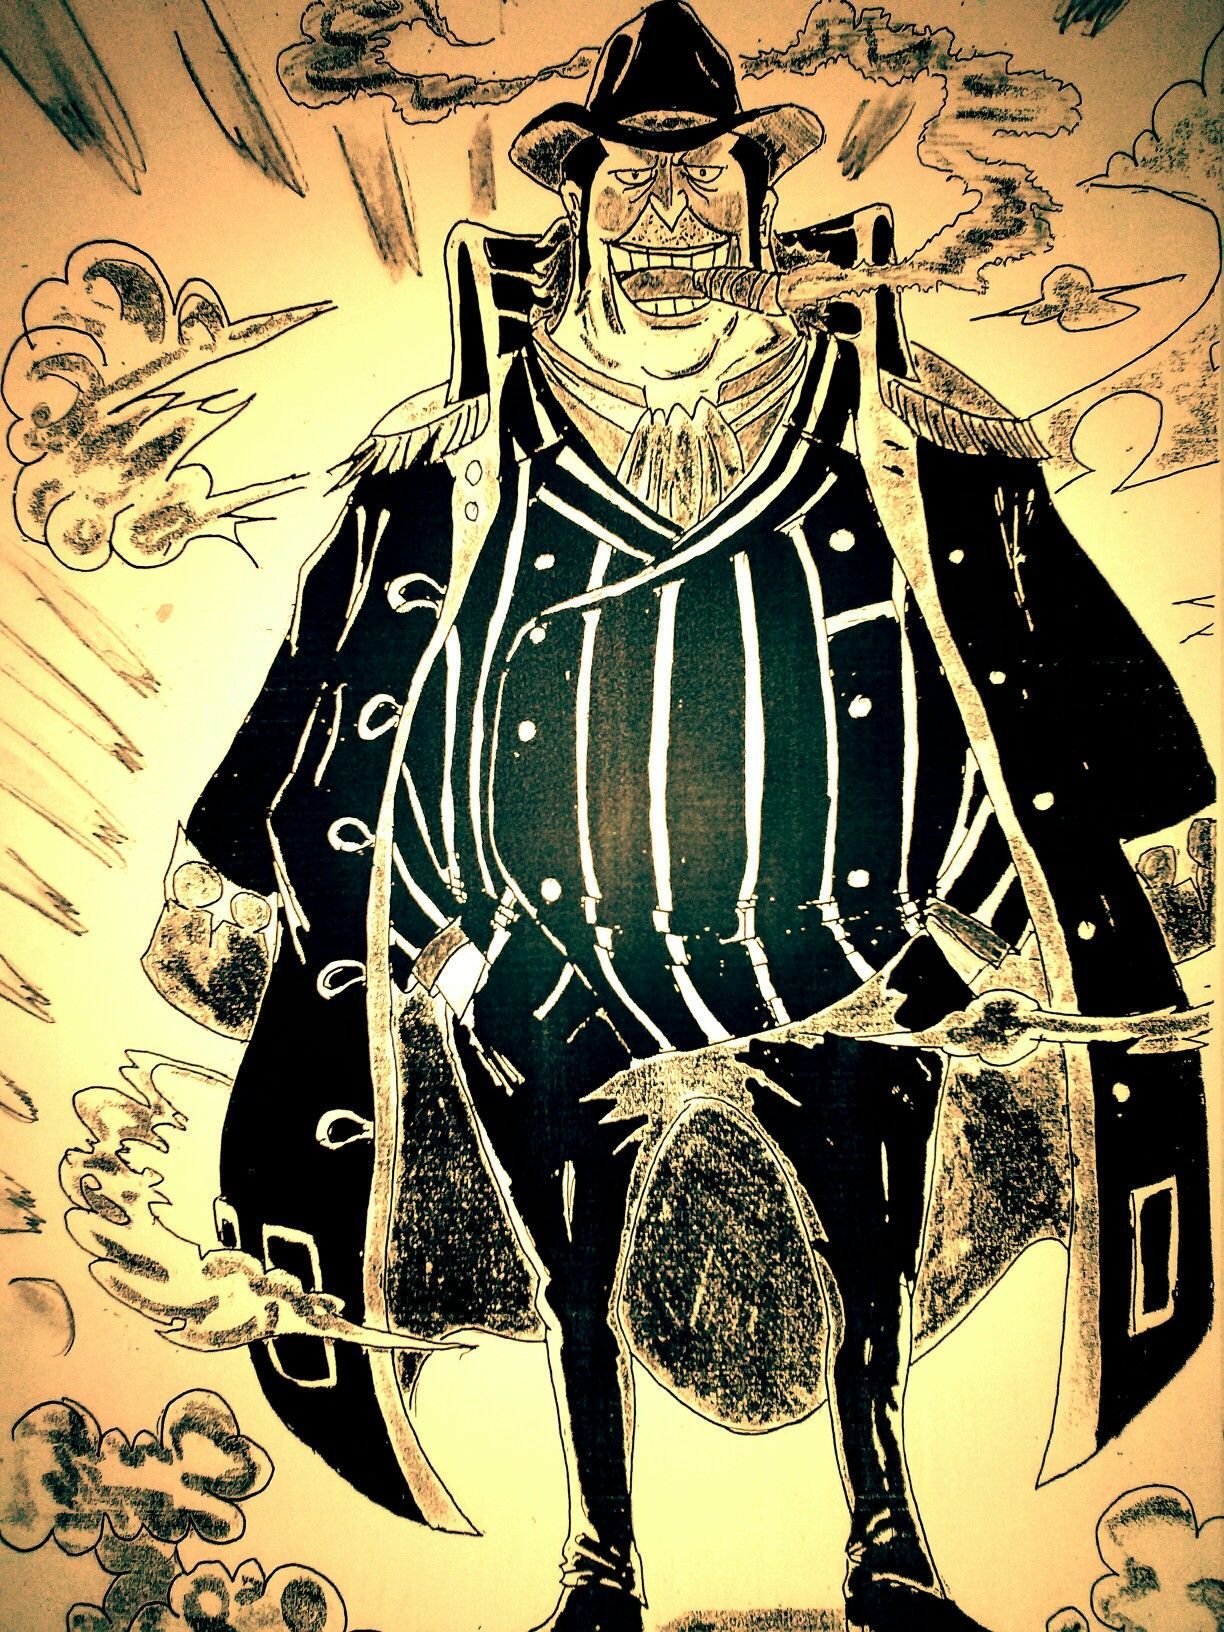 Capone “gang” bege ideas. one piece, gang, one piece anime